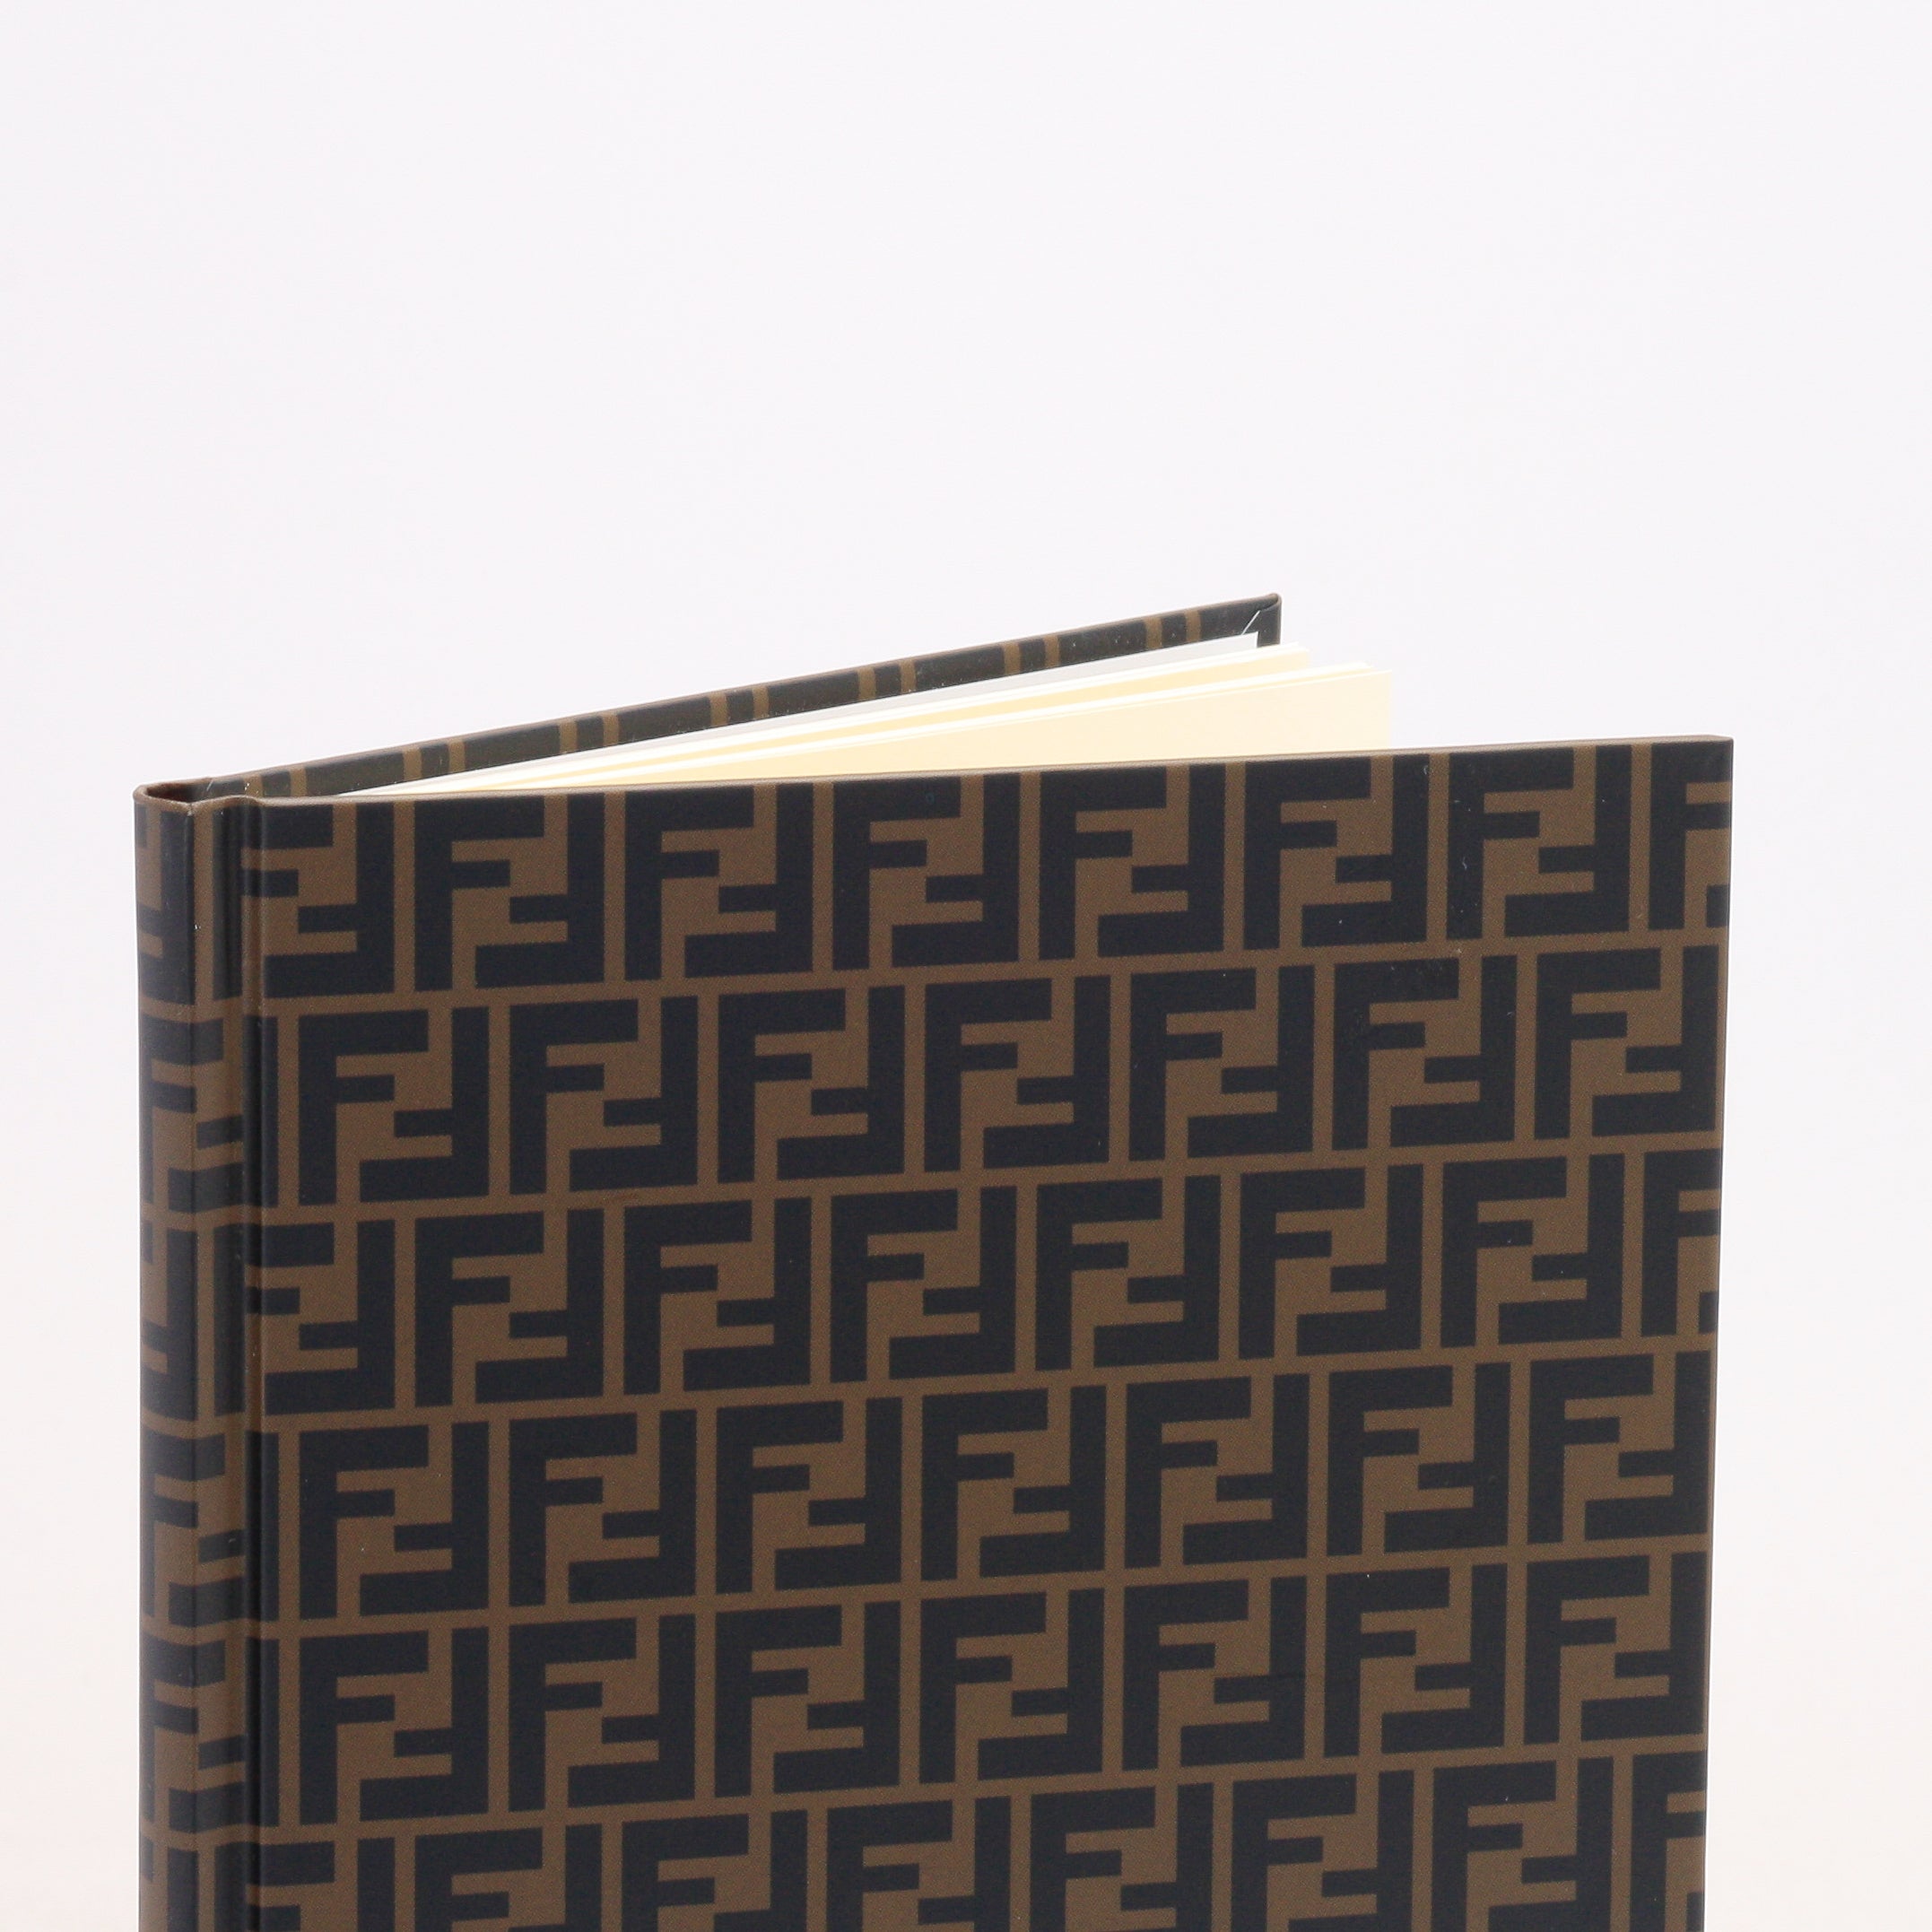 Fendi Notebook Spur Limited Edition NEW